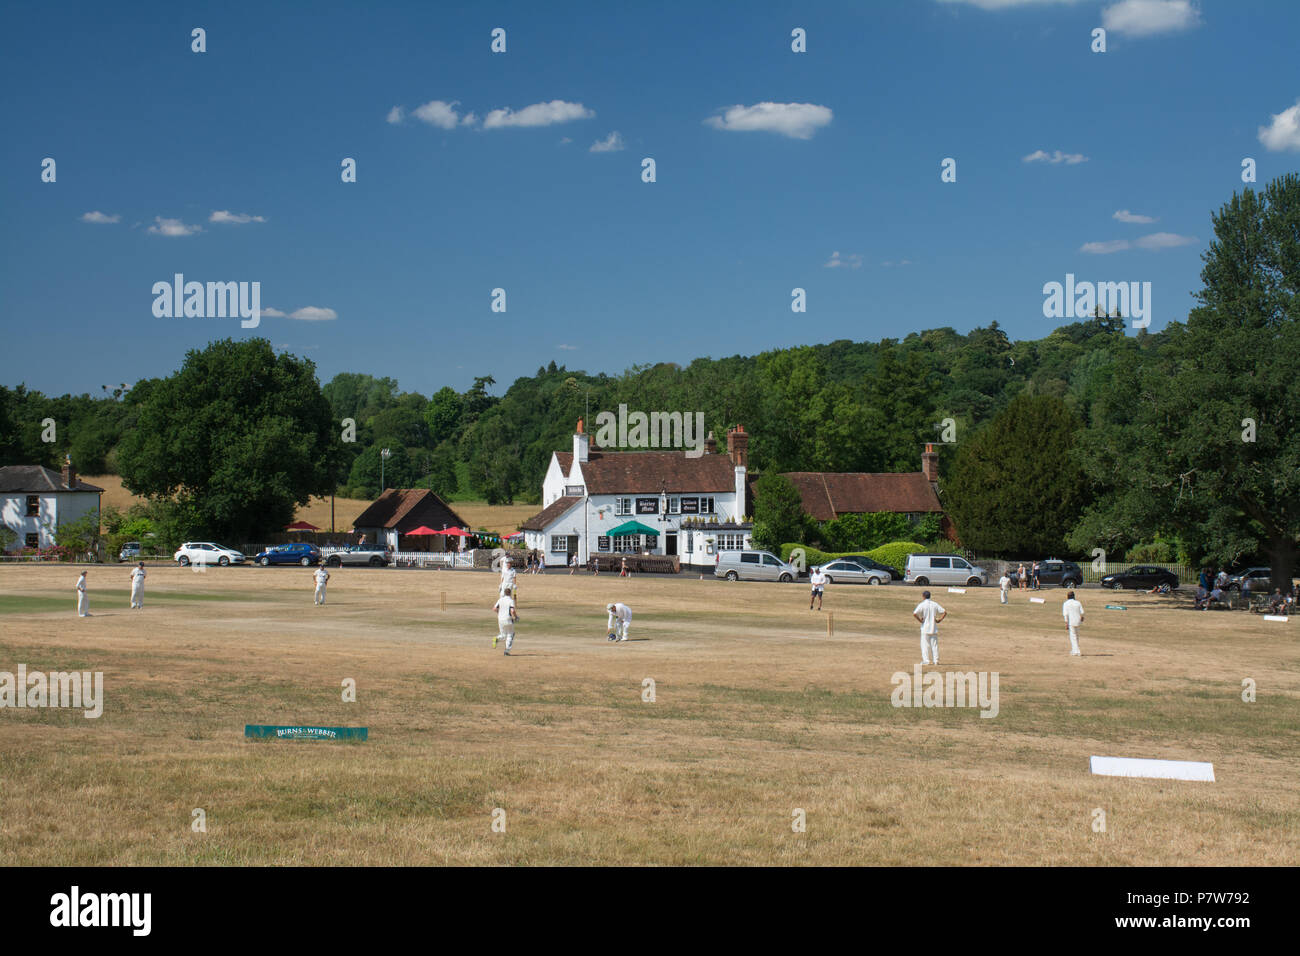 Tilford, Surrey, UK. 8th July, 2018. As the heatwave continues, people were having fun in the sun on a beautiful Sunday afternoon in the pretty village of Tilford. Many were cooling off in the river or sunbathing, while a cricket match was being played on the village green. Stock Photo